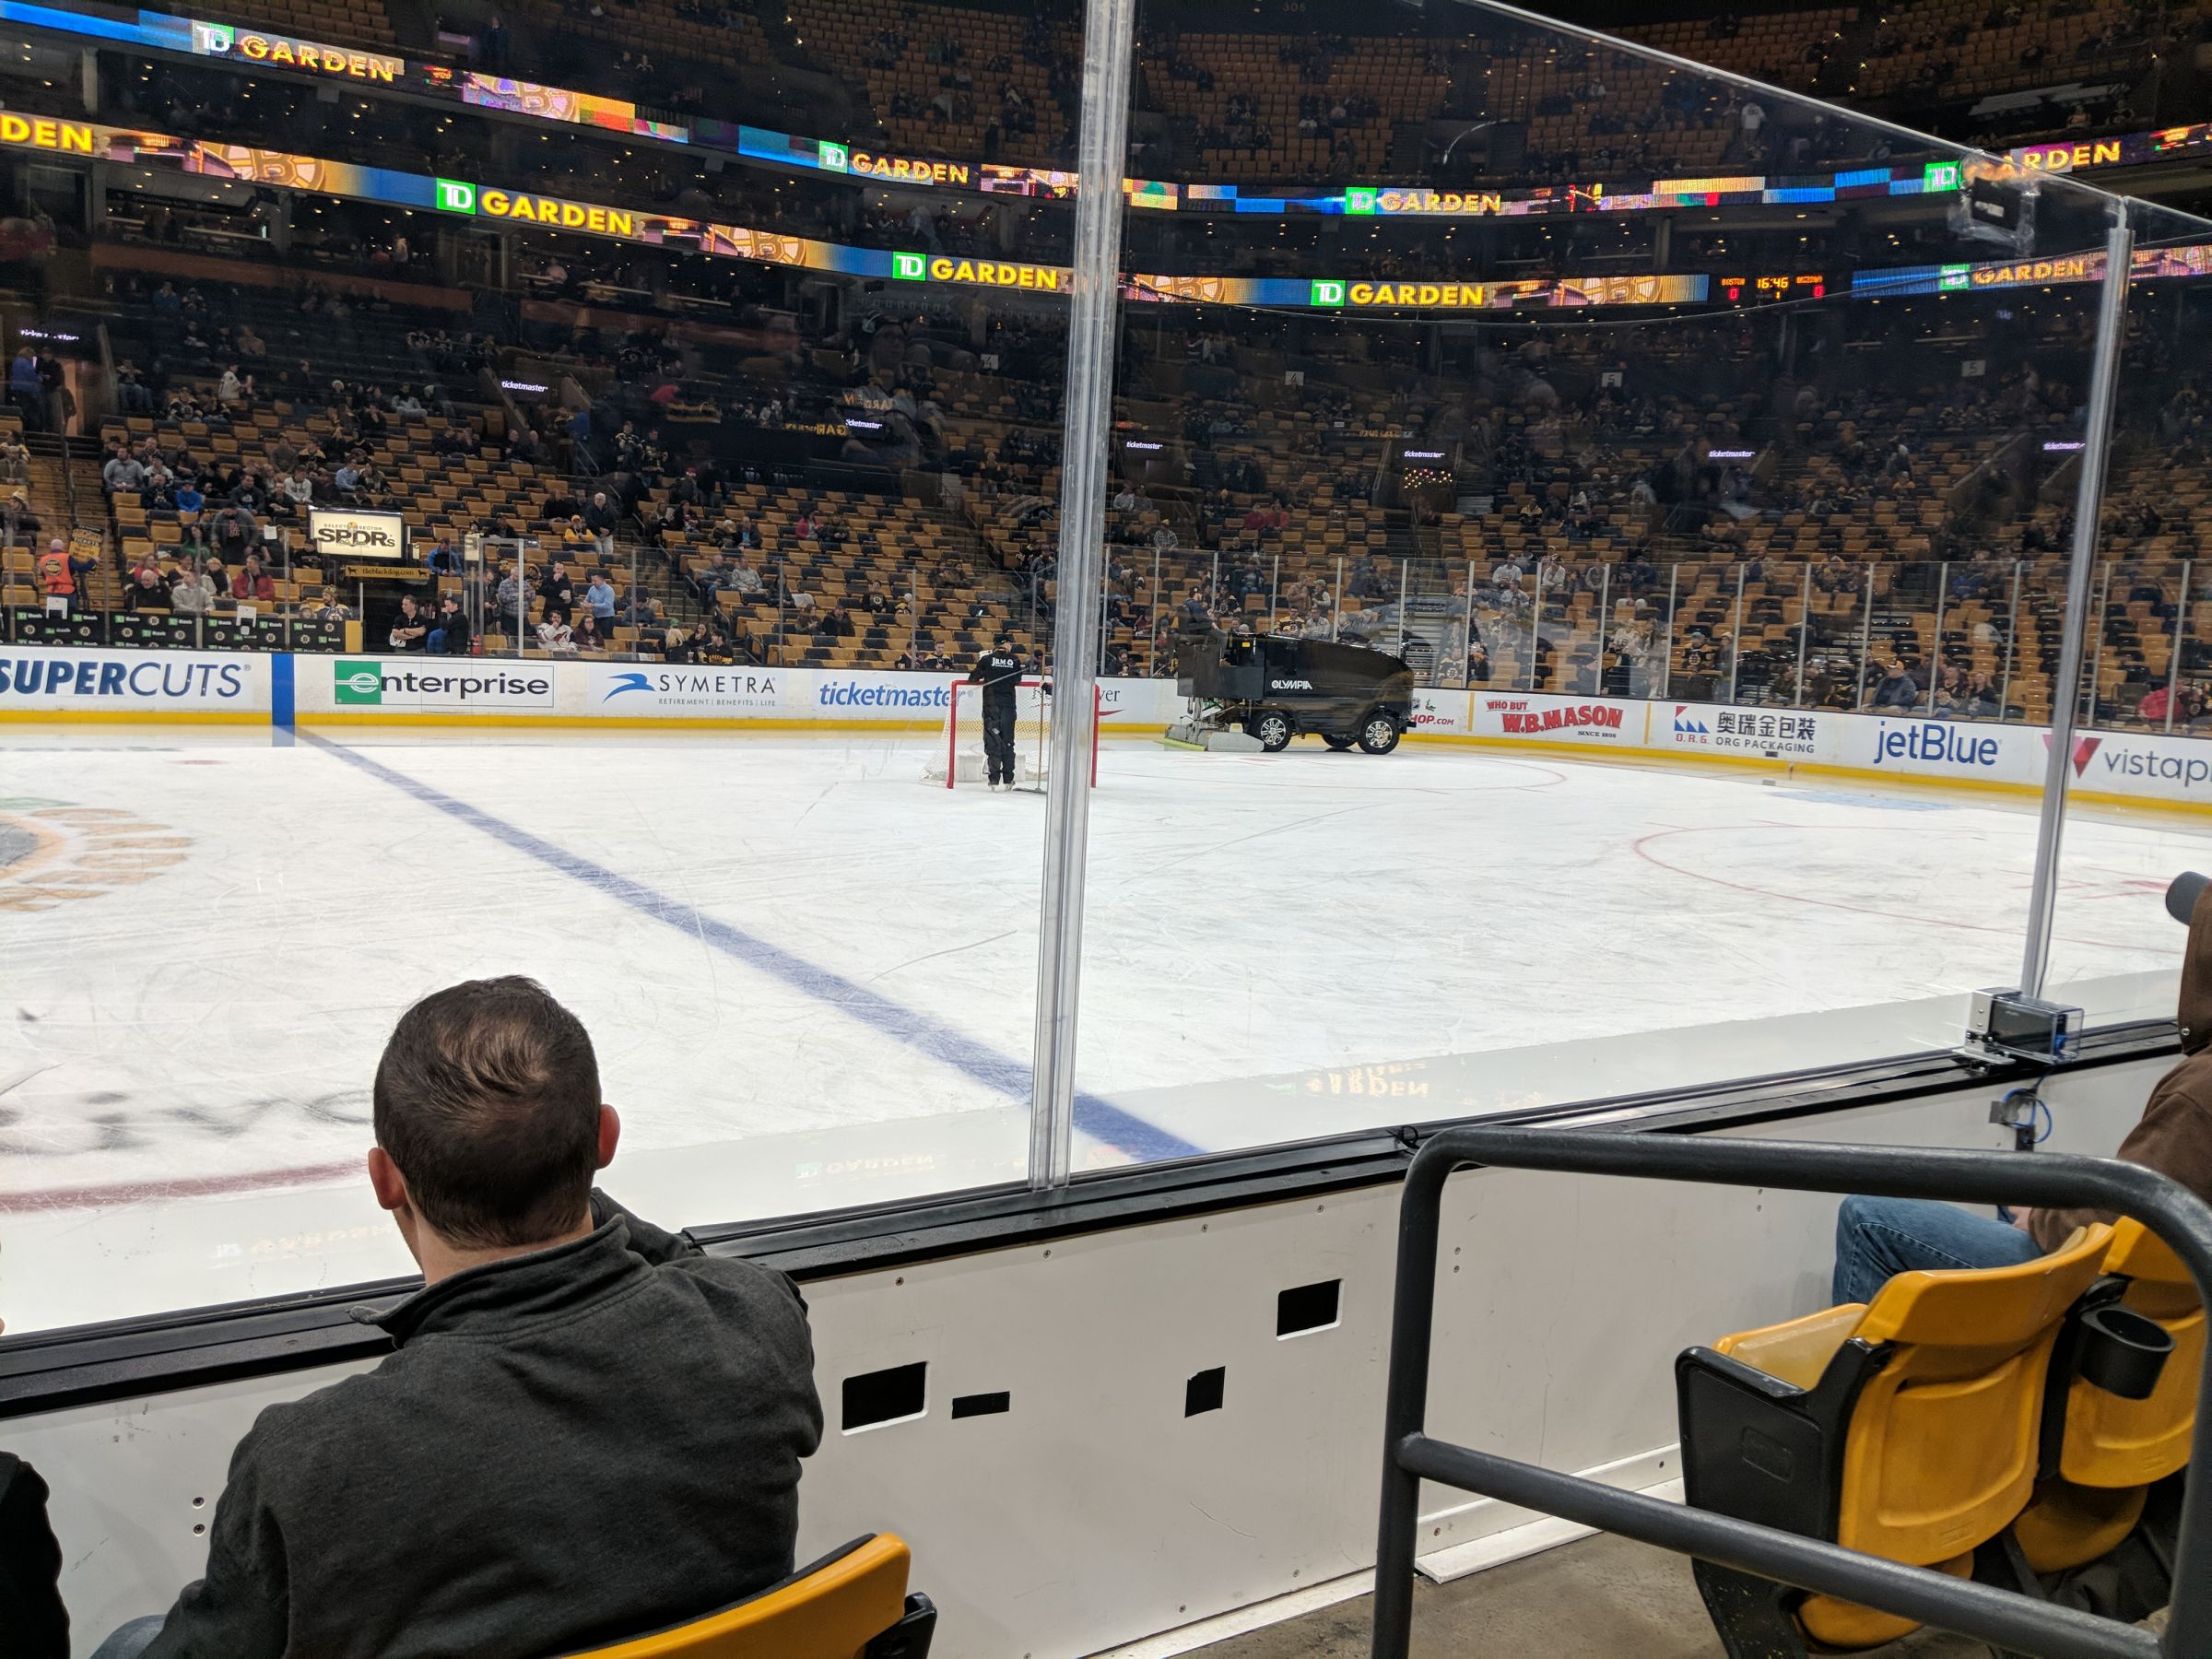 loge 12, row 3 seat view  for hockey - td garden